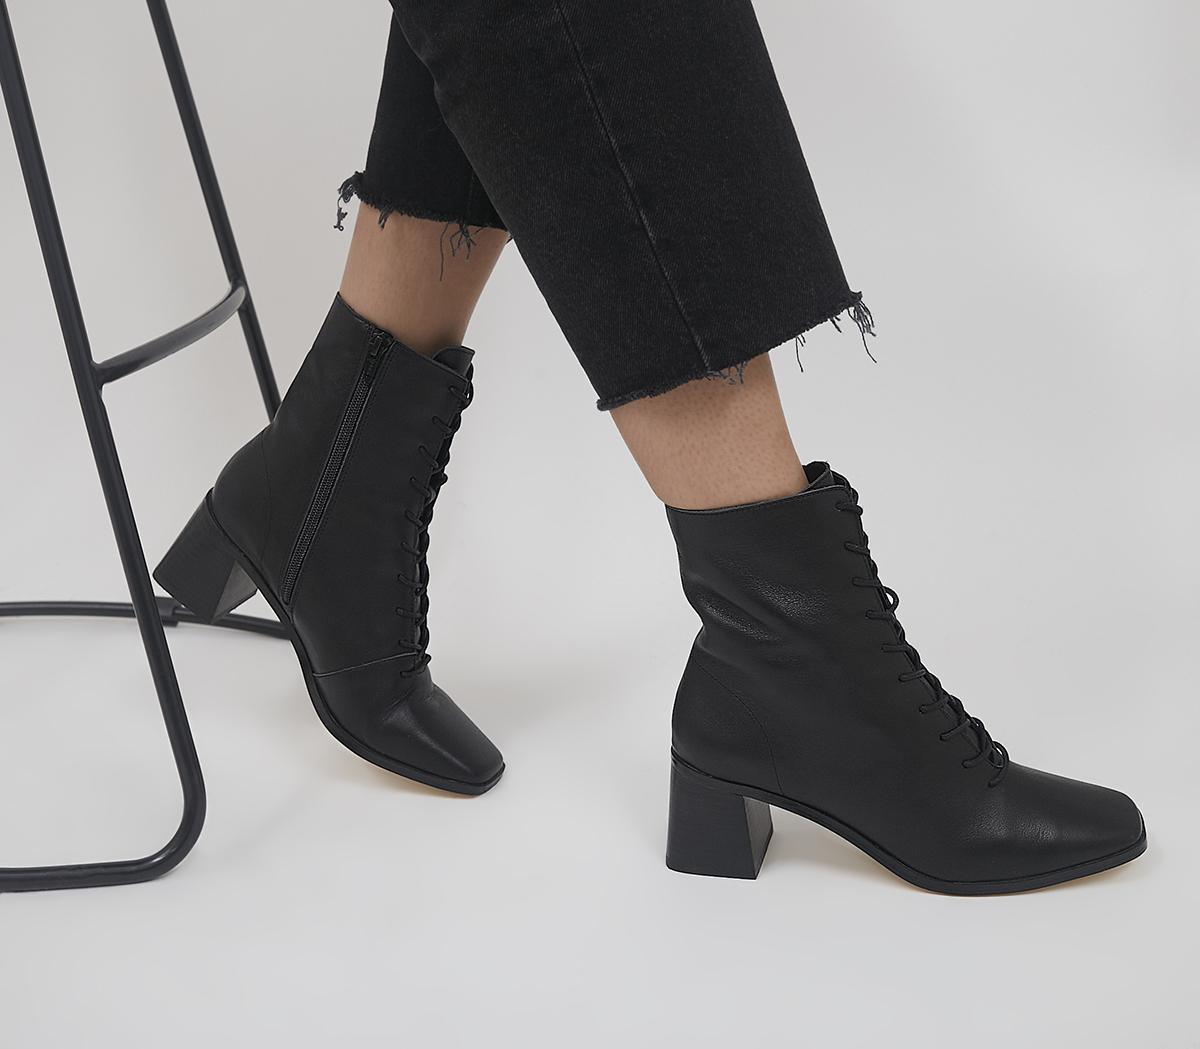 Black Pointed High Heel Black High Heel Boots For Women Sexy And  Fashionable Botas Femininas Chaussures Femmes T231121 From Babiq05, $7.8 |  DHgate.Com